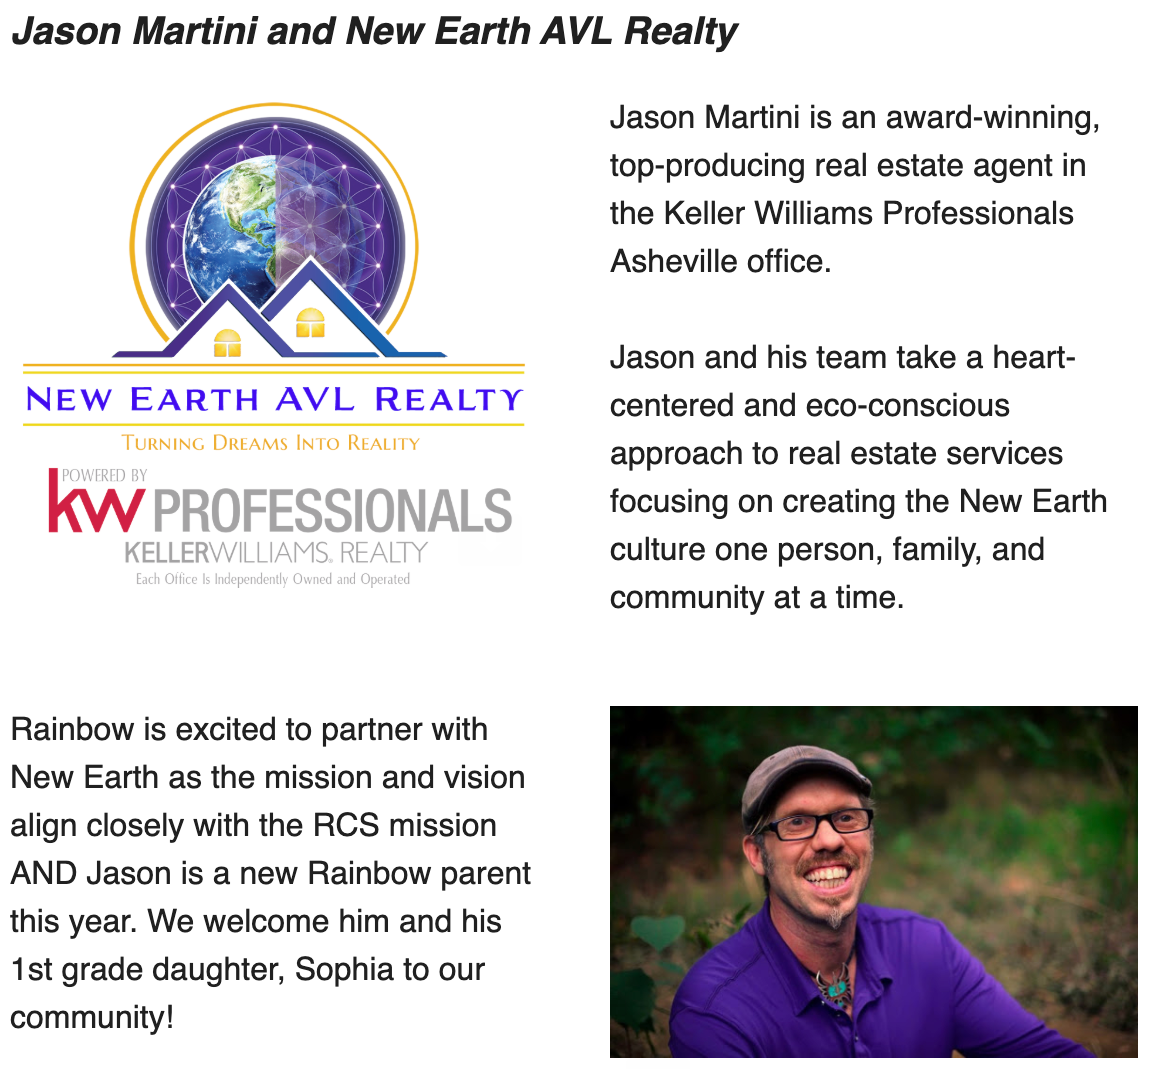 New Earth AVL Realty and Jason Martini is Acknowledged By Rainbow Community School As A Sponsor